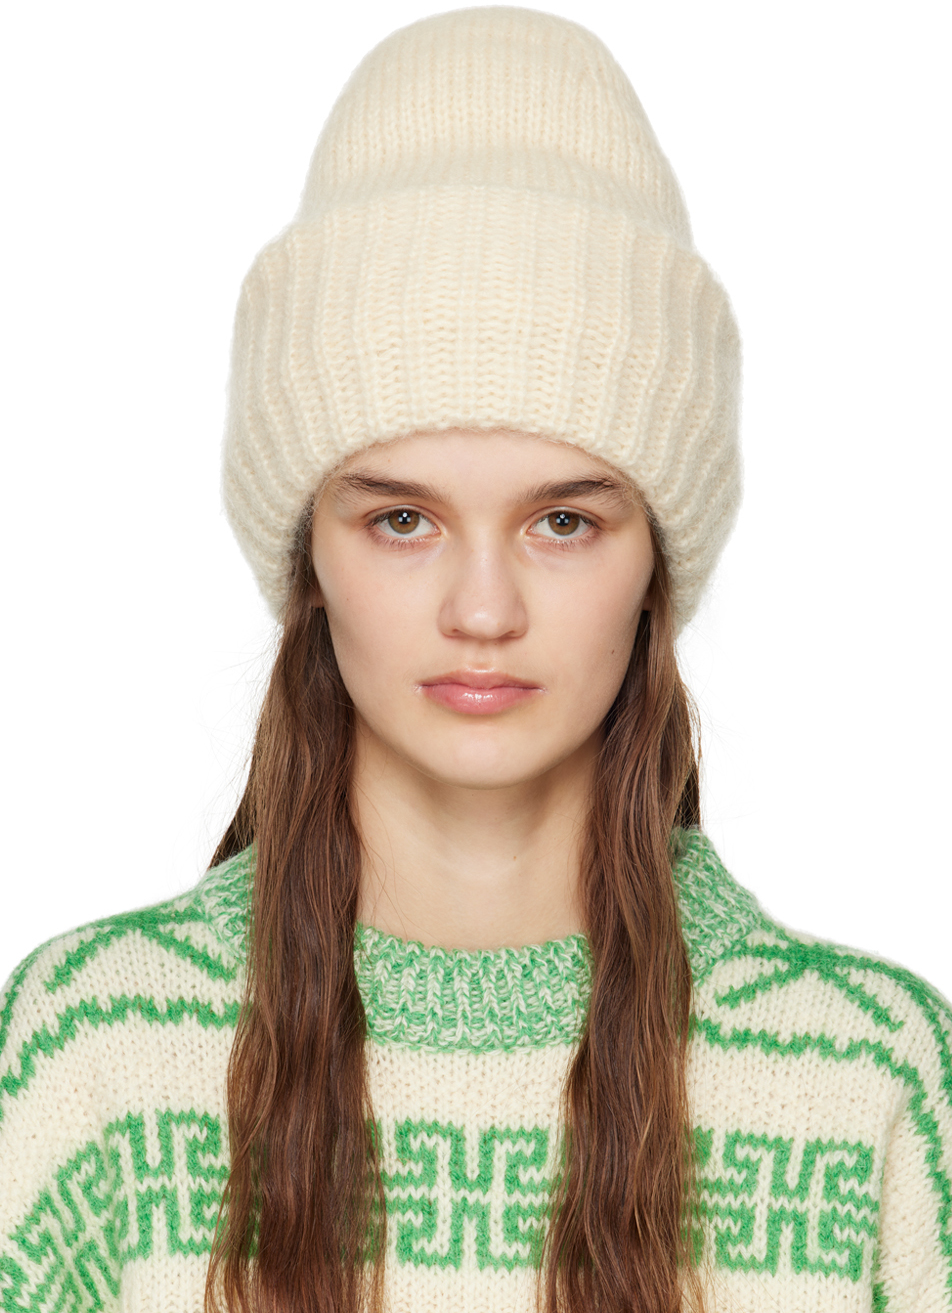 SSENSE Exclusive Off-White Beanie by Teurn Studios on Sale | Beanies